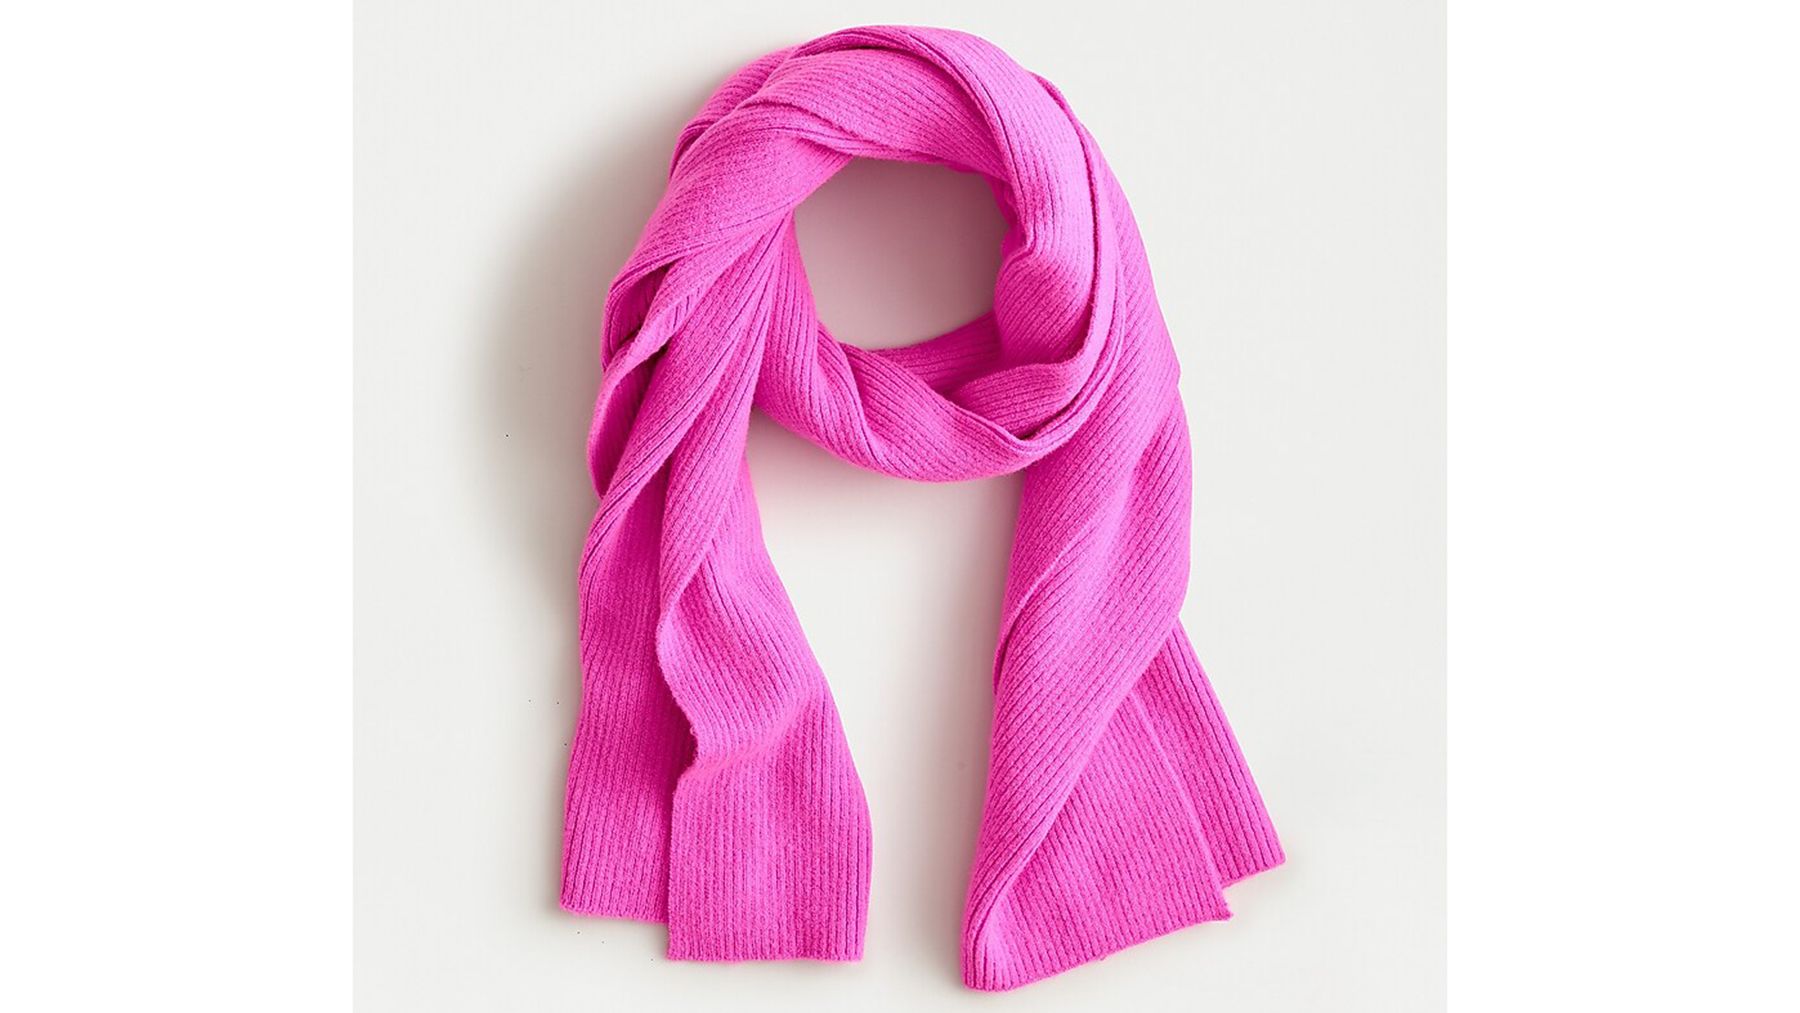 Long Scarves For Women Winter Scarf Blanket Cashmere Soft Shawl Tassel Pink Hand Knitting Scarf 